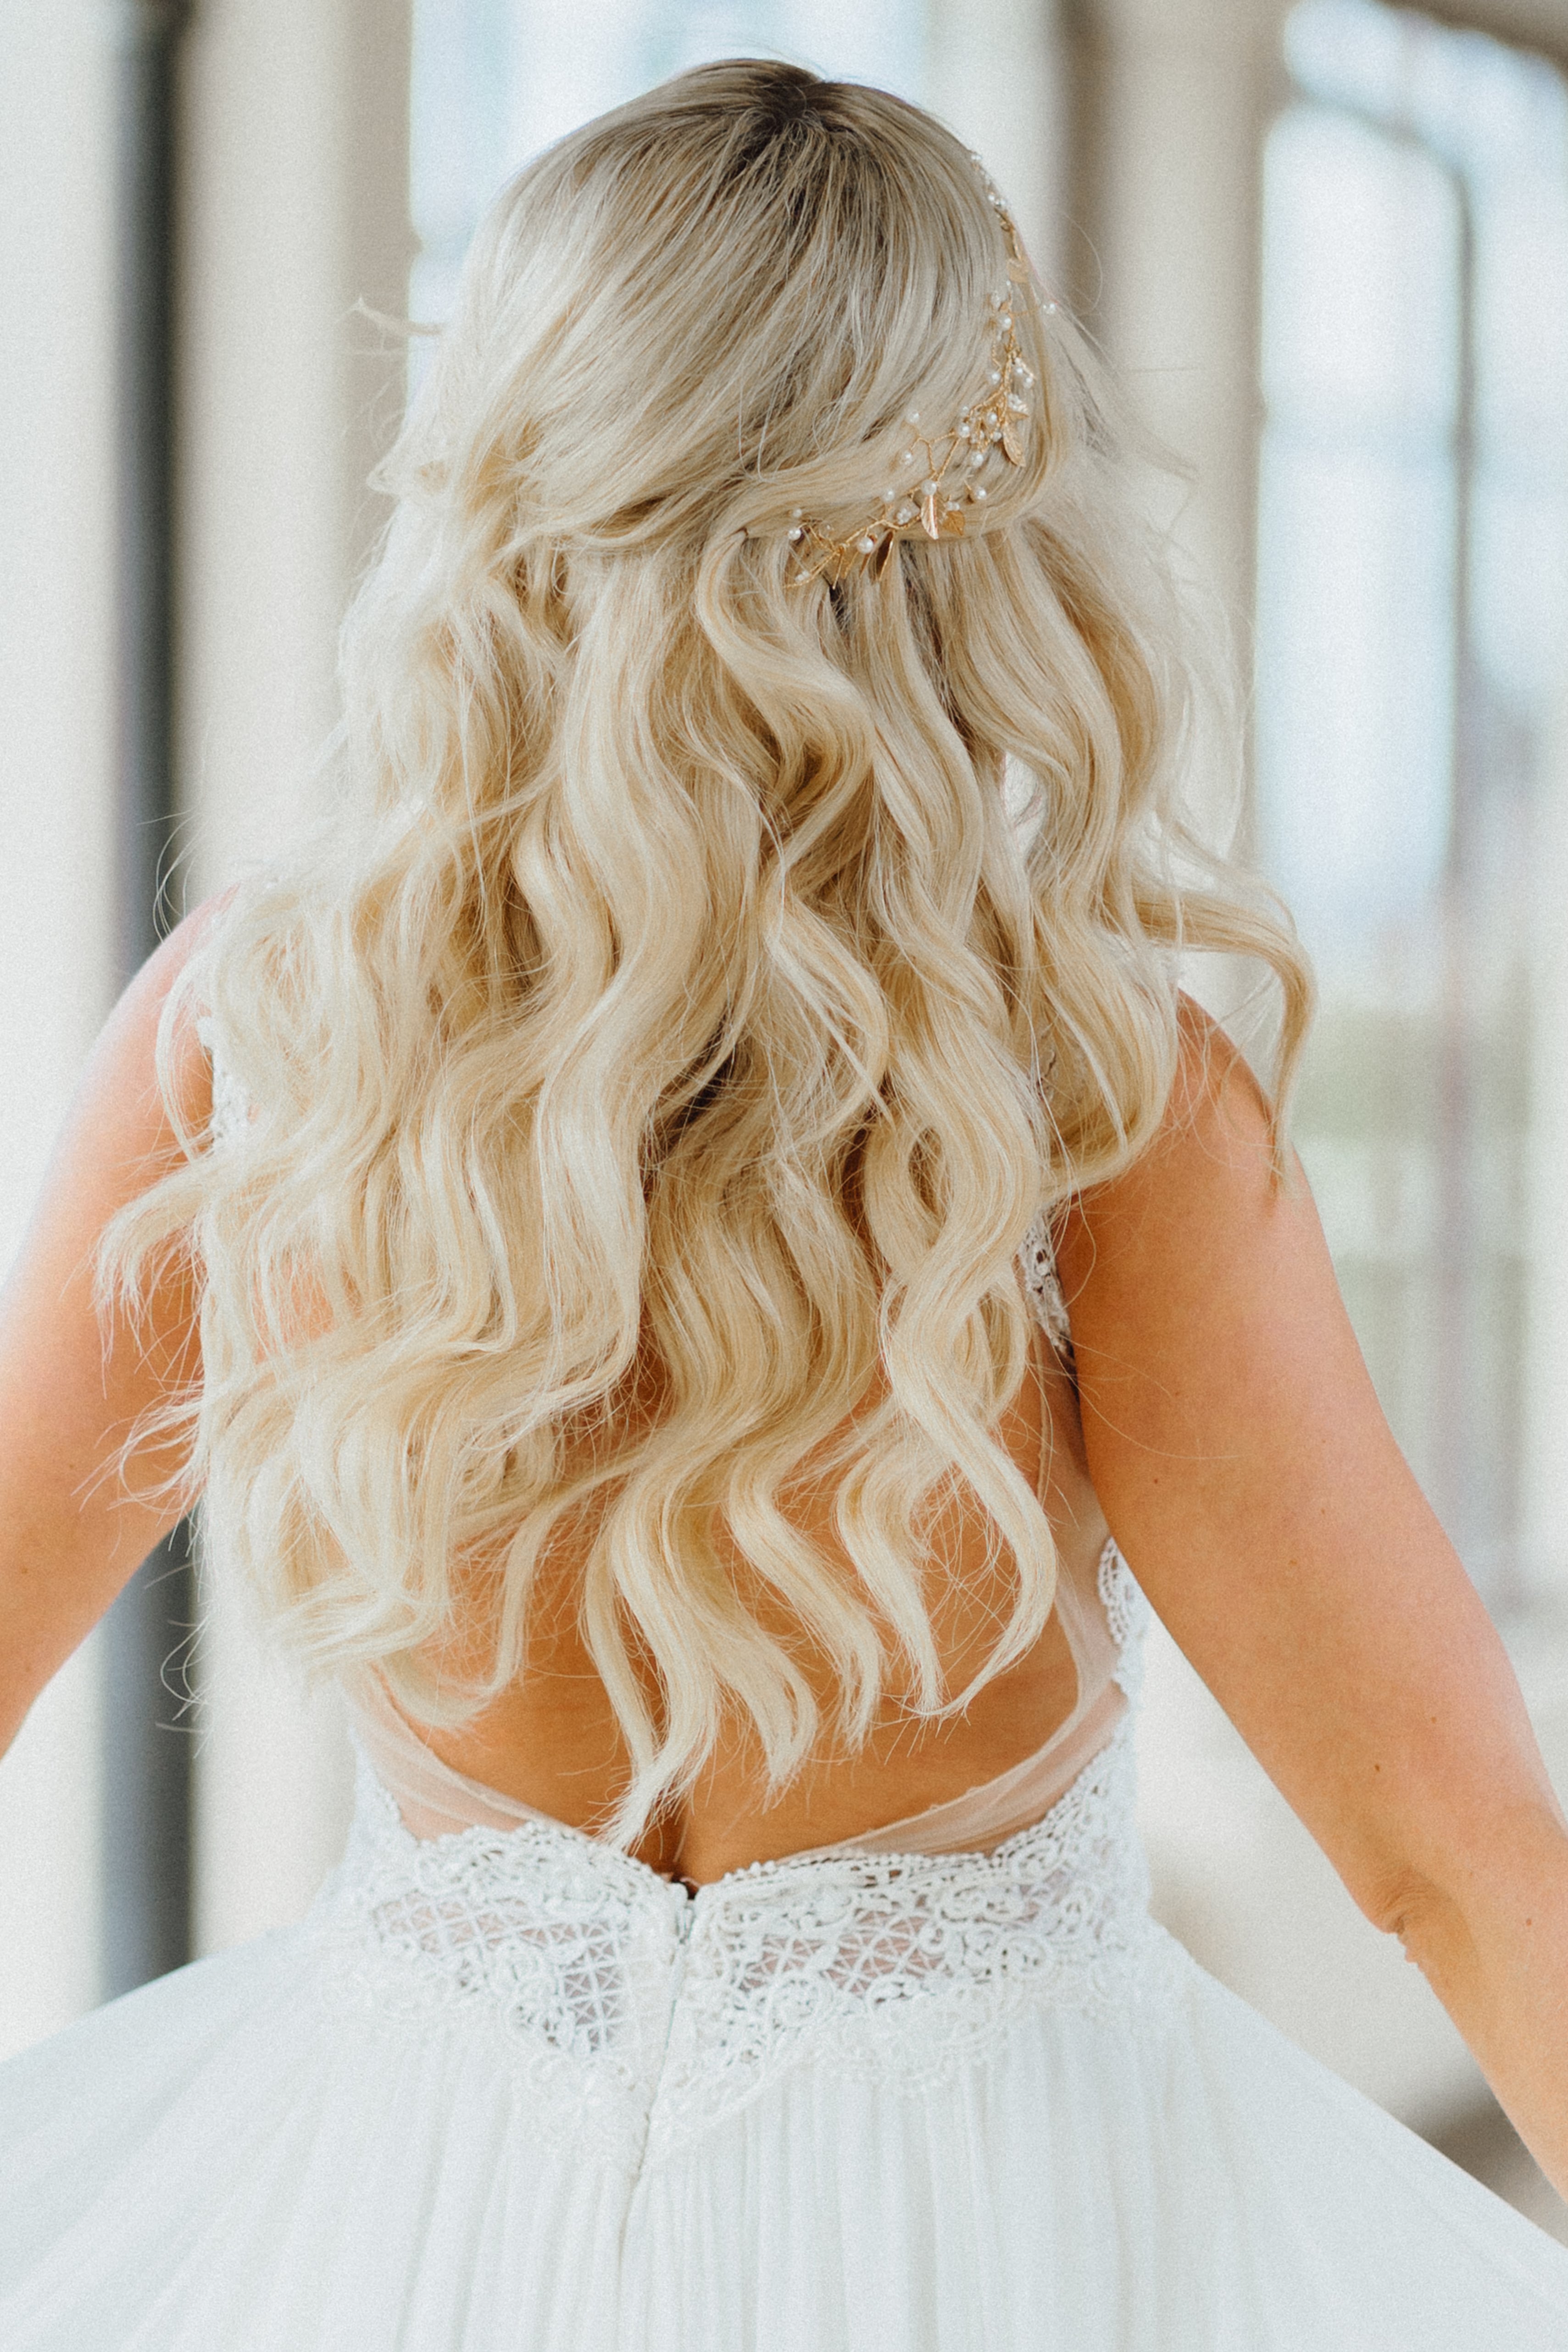 8 Tips for Choosing Your Bridal Hair Accessories